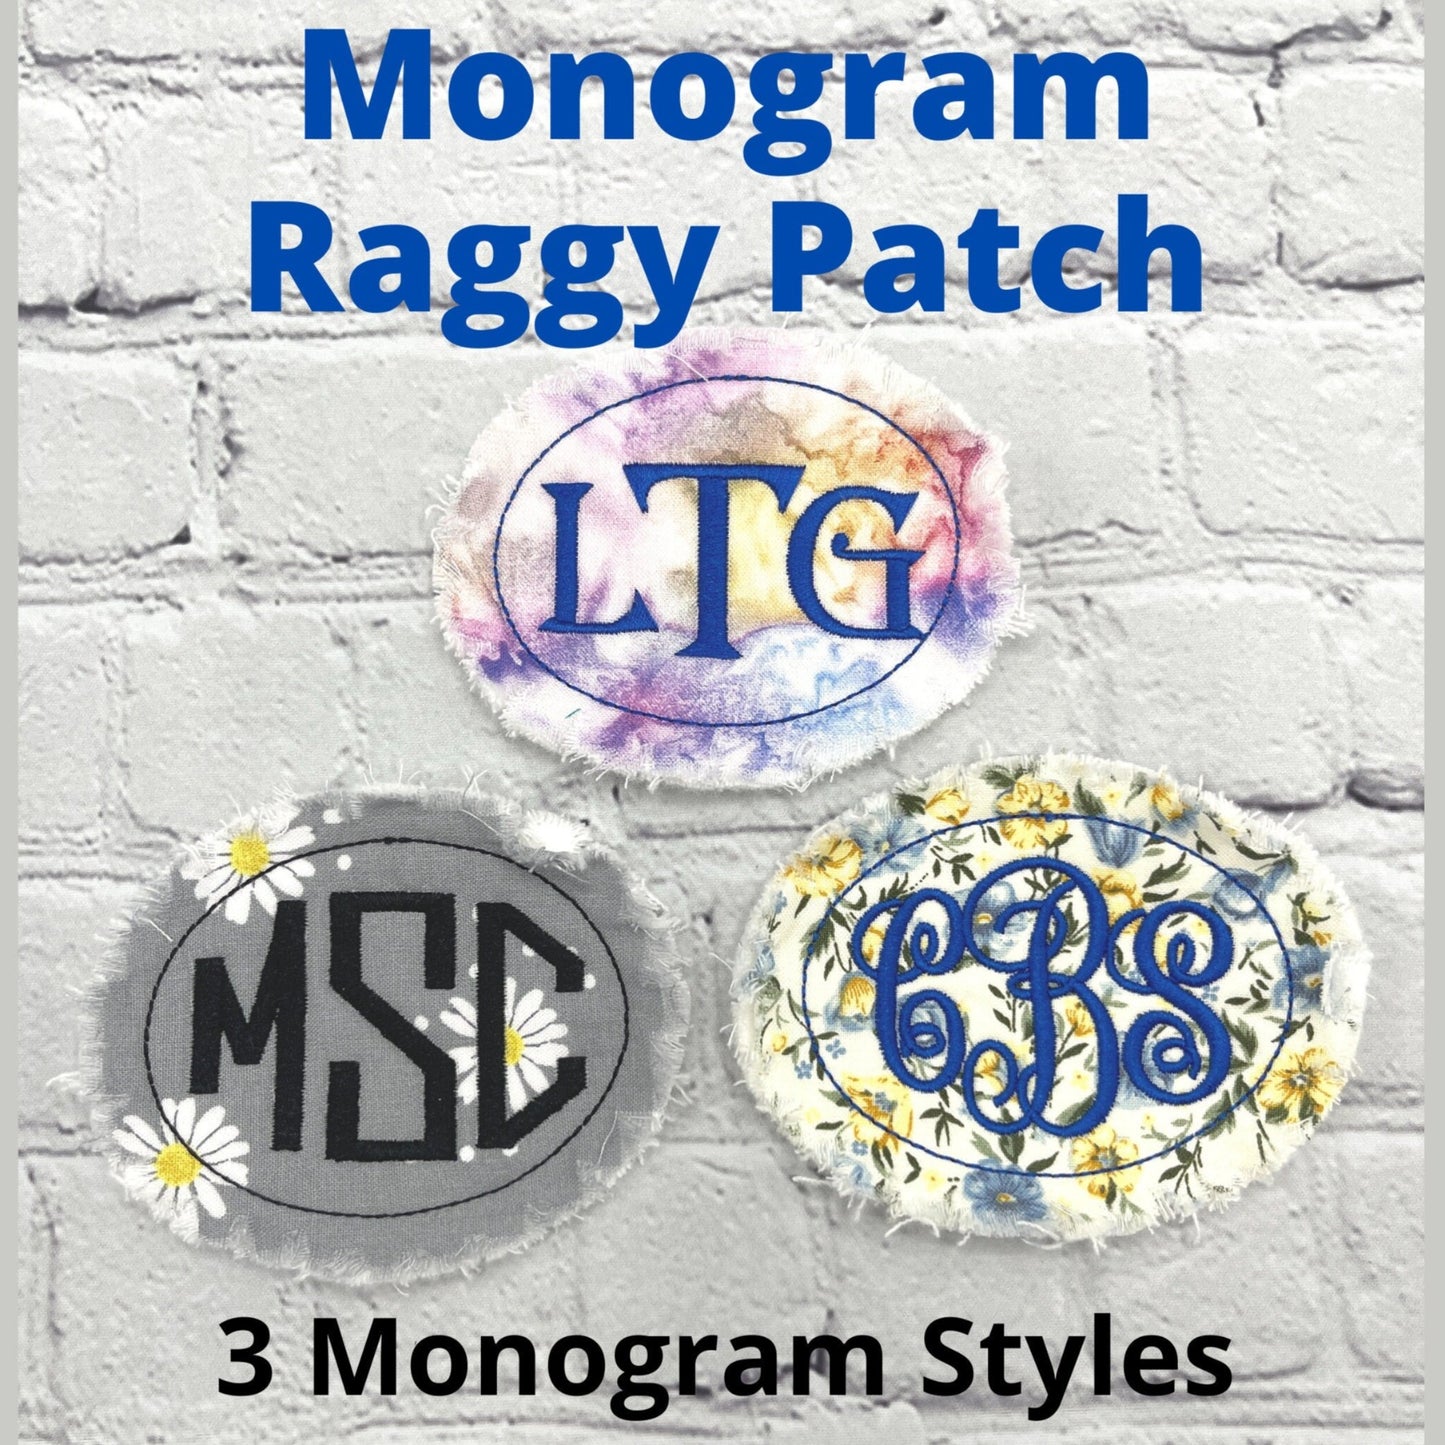 Monogram raggy patch embroidered with several fabric choices and fonts